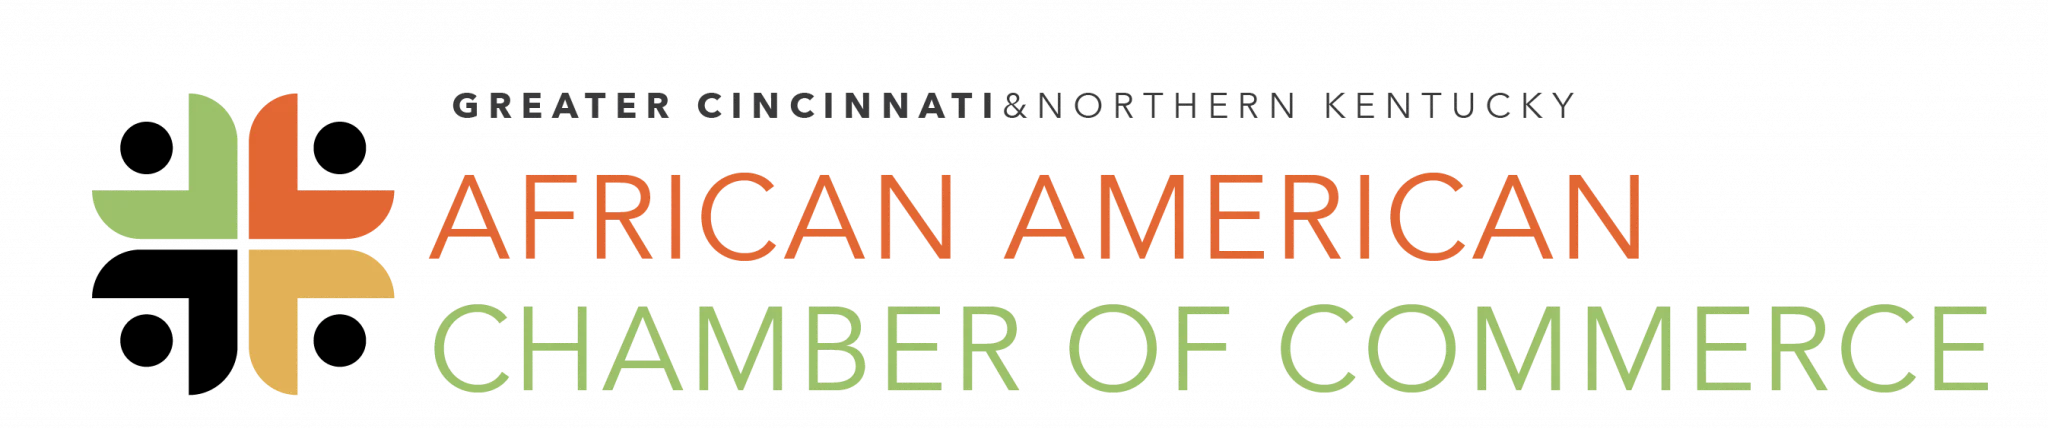 African American Chamber of Commerce Logo